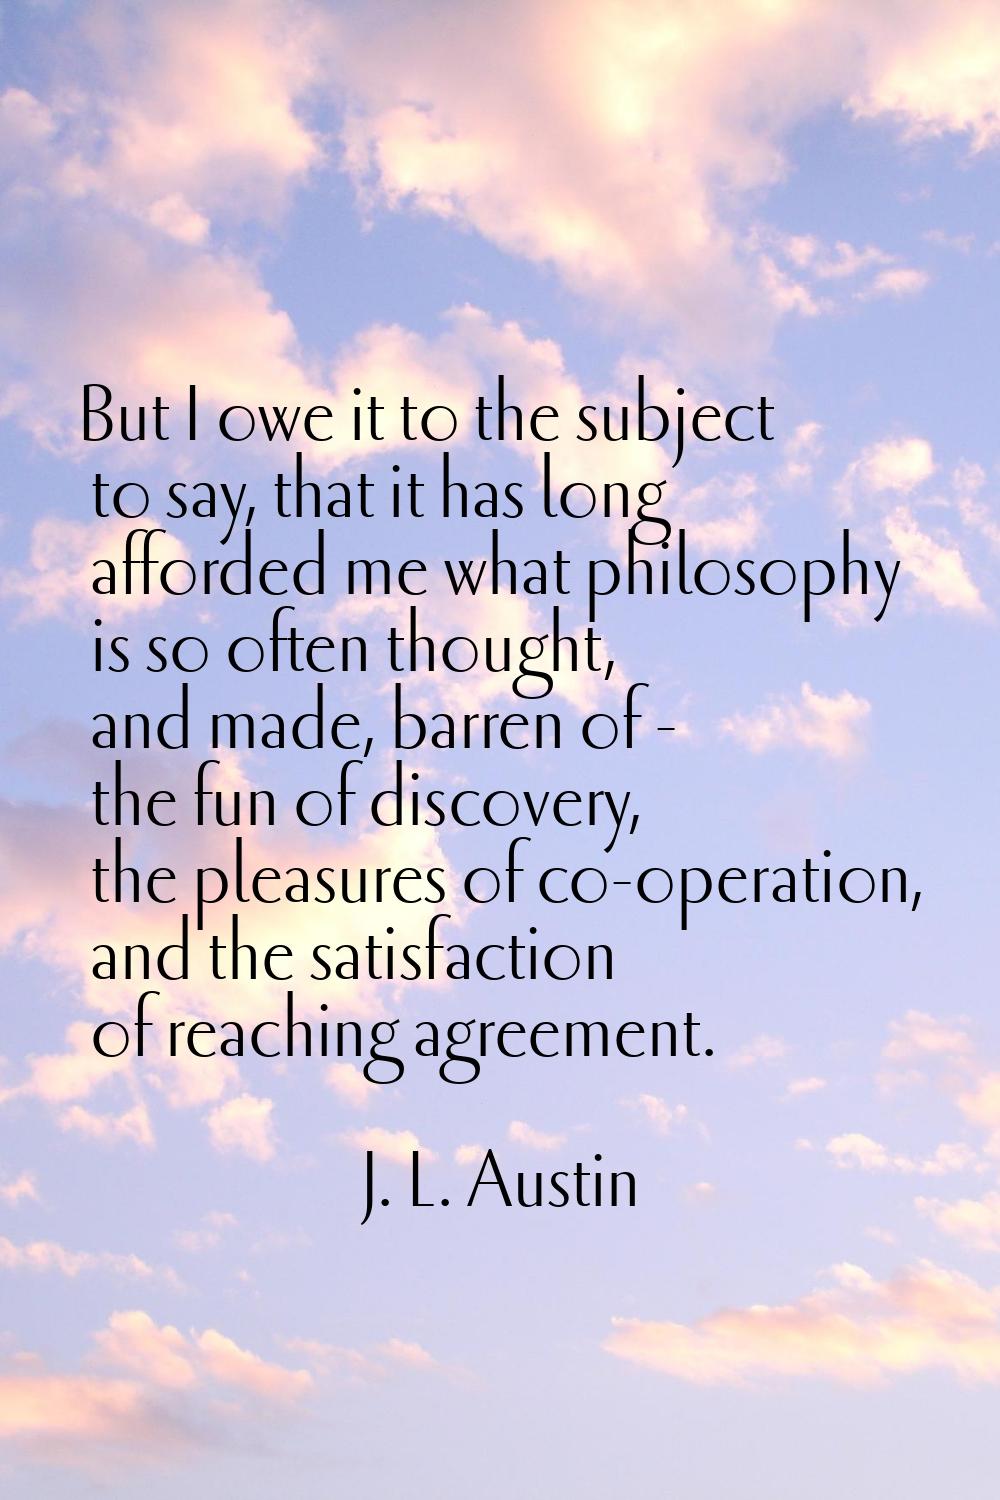 But I owe it to the subject to say, that it has long afforded me what philosophy is so often though